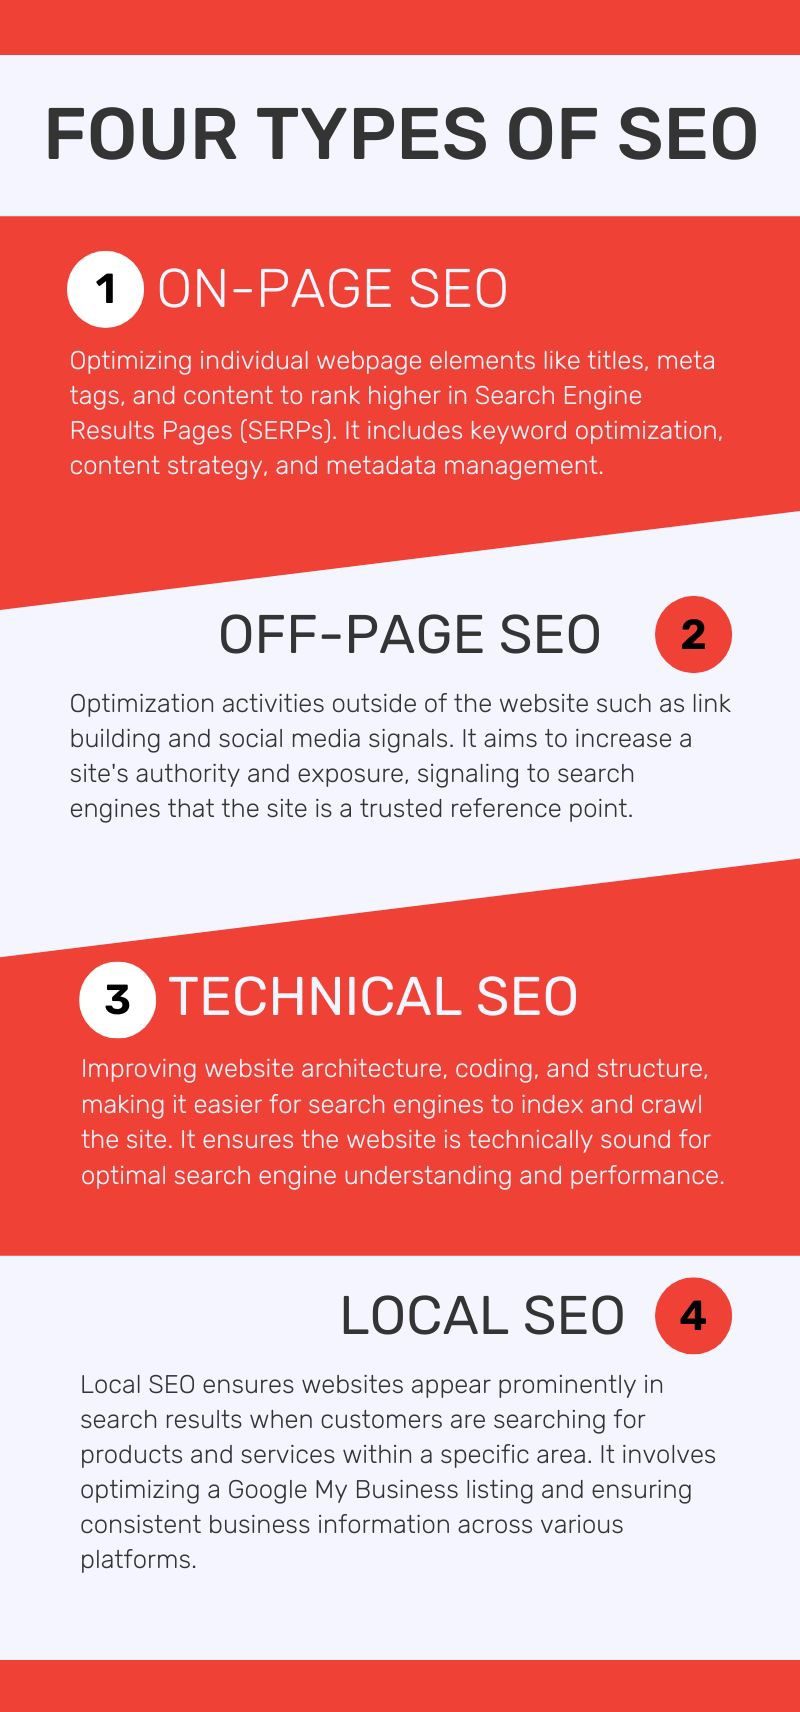 On-Page SEO: This type of SEO involves optimizing individual webpage elements like titles, meta tags, and content to rank higher in Search Engine Results Pages (SERPs). It includes keyword optimization, content strategy, and metadata management.

Off-Page SEO: Off-Page SEO refers to optimization activities outside of the website such as link building and social media signals. It aims to increase a site's authority and exposure, signaling to search engines that the site is a trusted reference point.

Technical SEO: This type of SEO focuses on improving the website’s architecture, coding, and structure, making it easier for search engines to index and crawl the site. It ensures the website is technically sound for optimal search engine understanding and performance.

Local SEO: Local SEO ensures that the website appears prominently in search results when potential customers are searching for products and services within a specific area. It involves optimizing a Google My Business listing and ensuring consistent business information across various platforms.